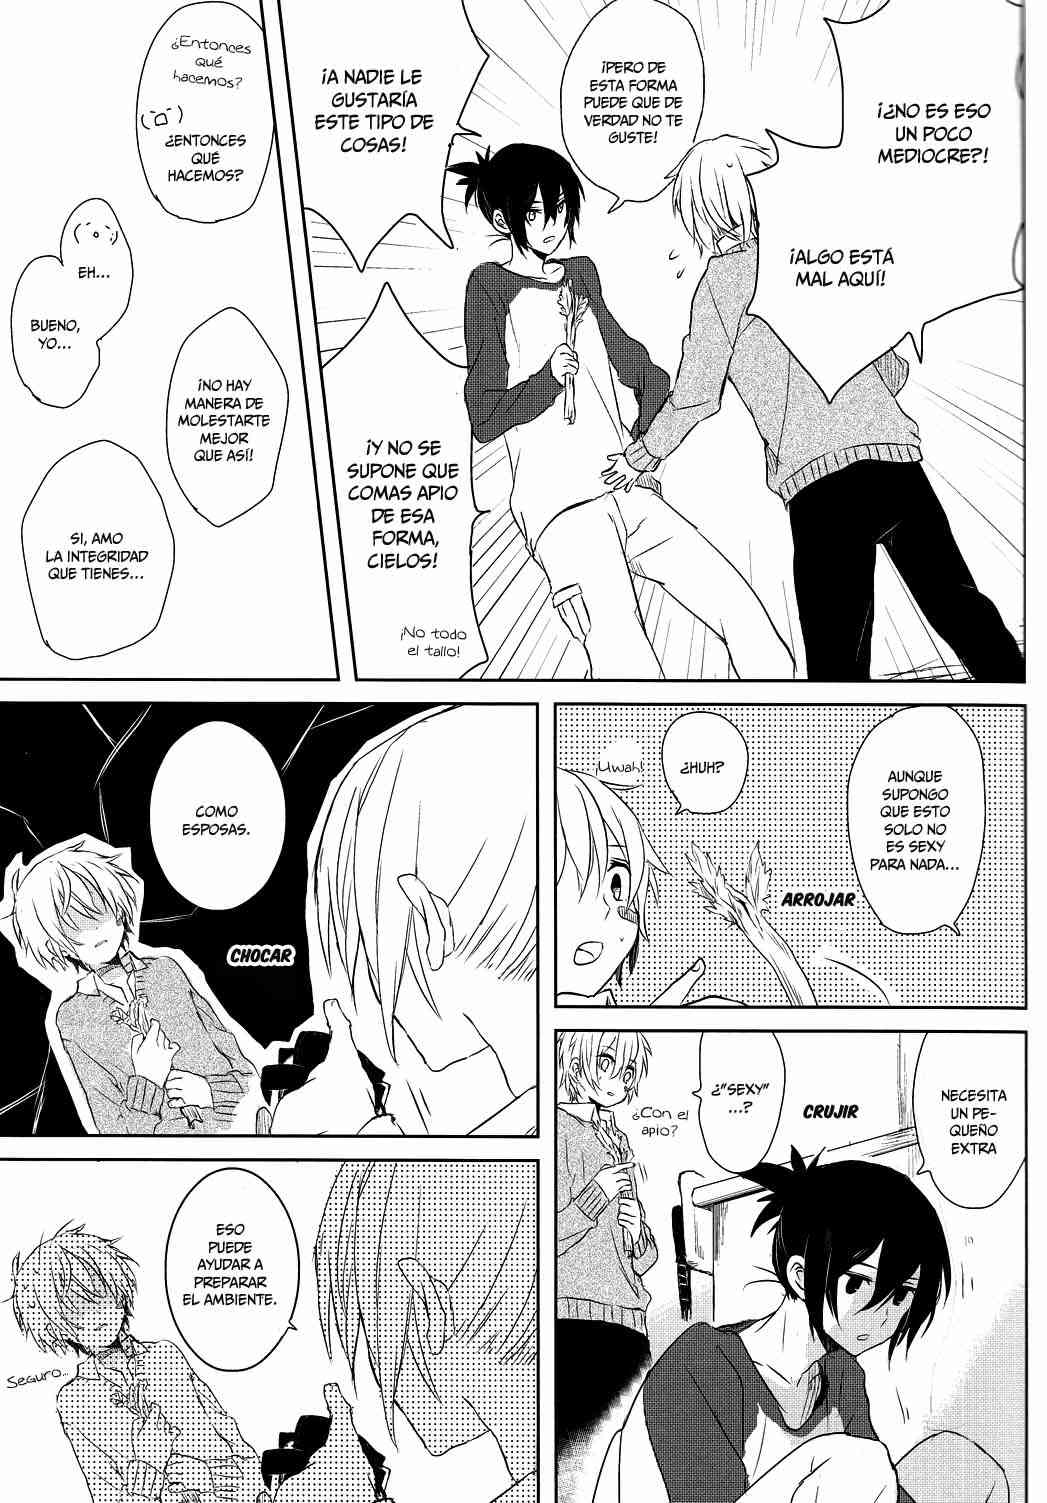 Doujinshi No.6 Determine Your Desire, then Do It Chapter-1 - 22